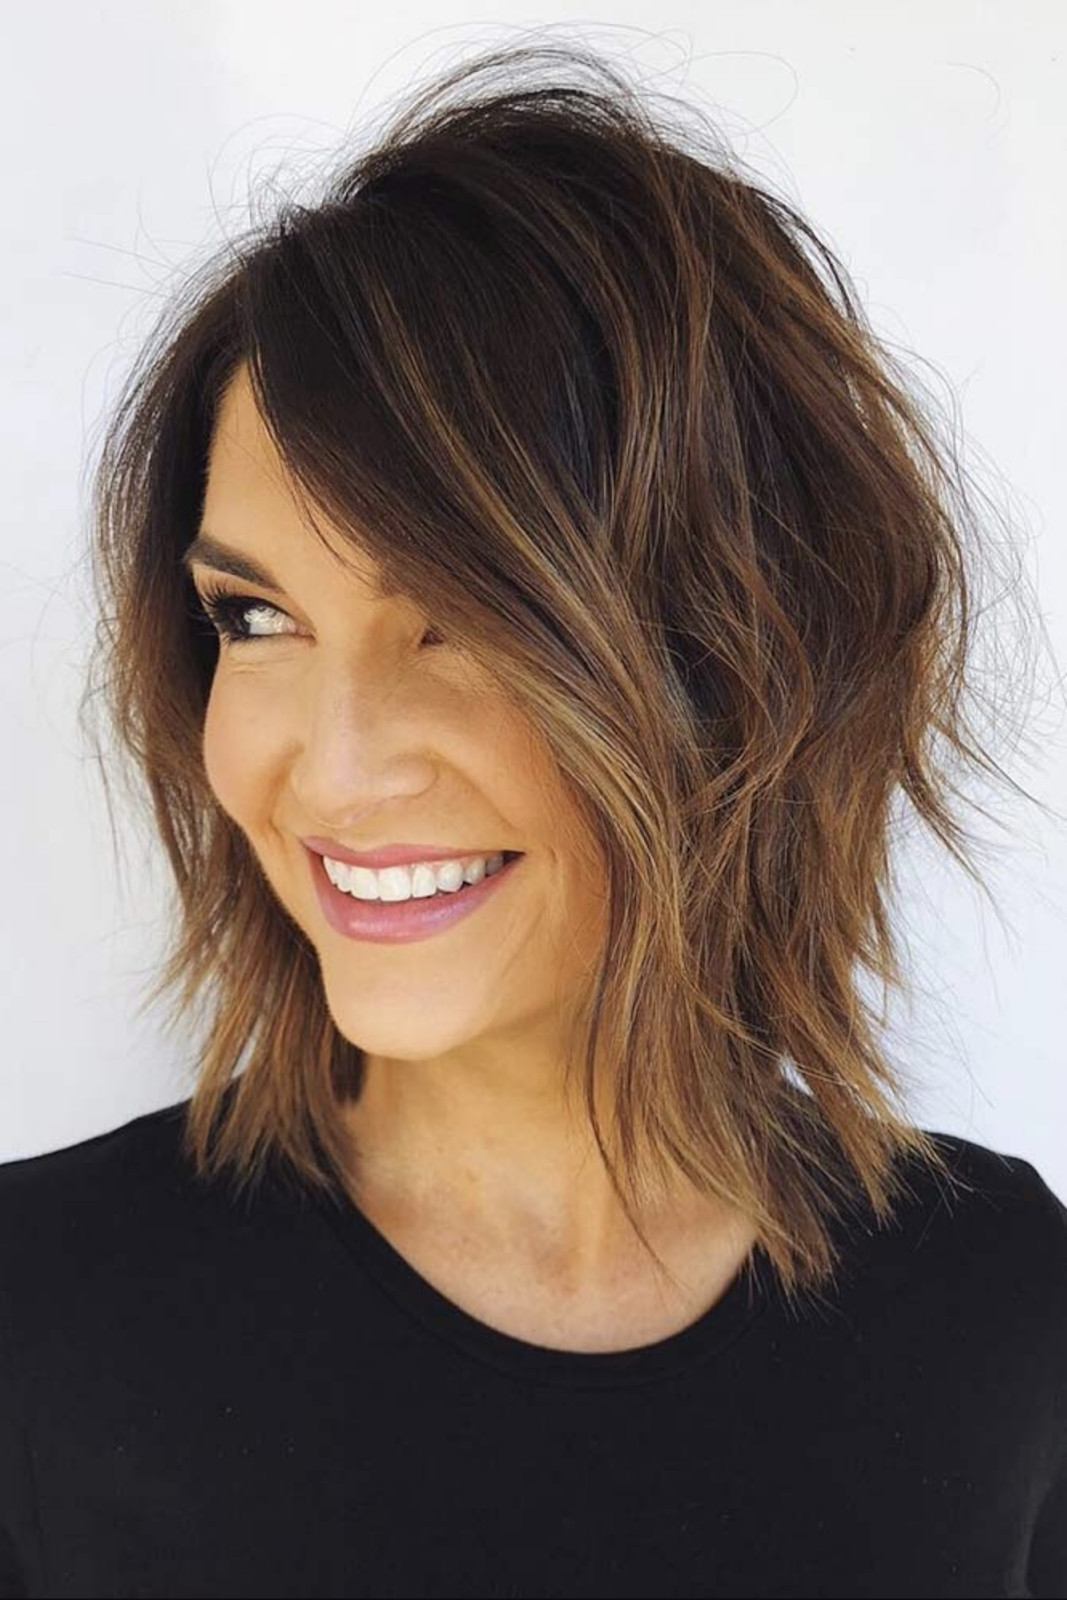 Short Shaggy Haircuts 2020
 2019 2020 Short Hairstyles for Women Over 50 That Are